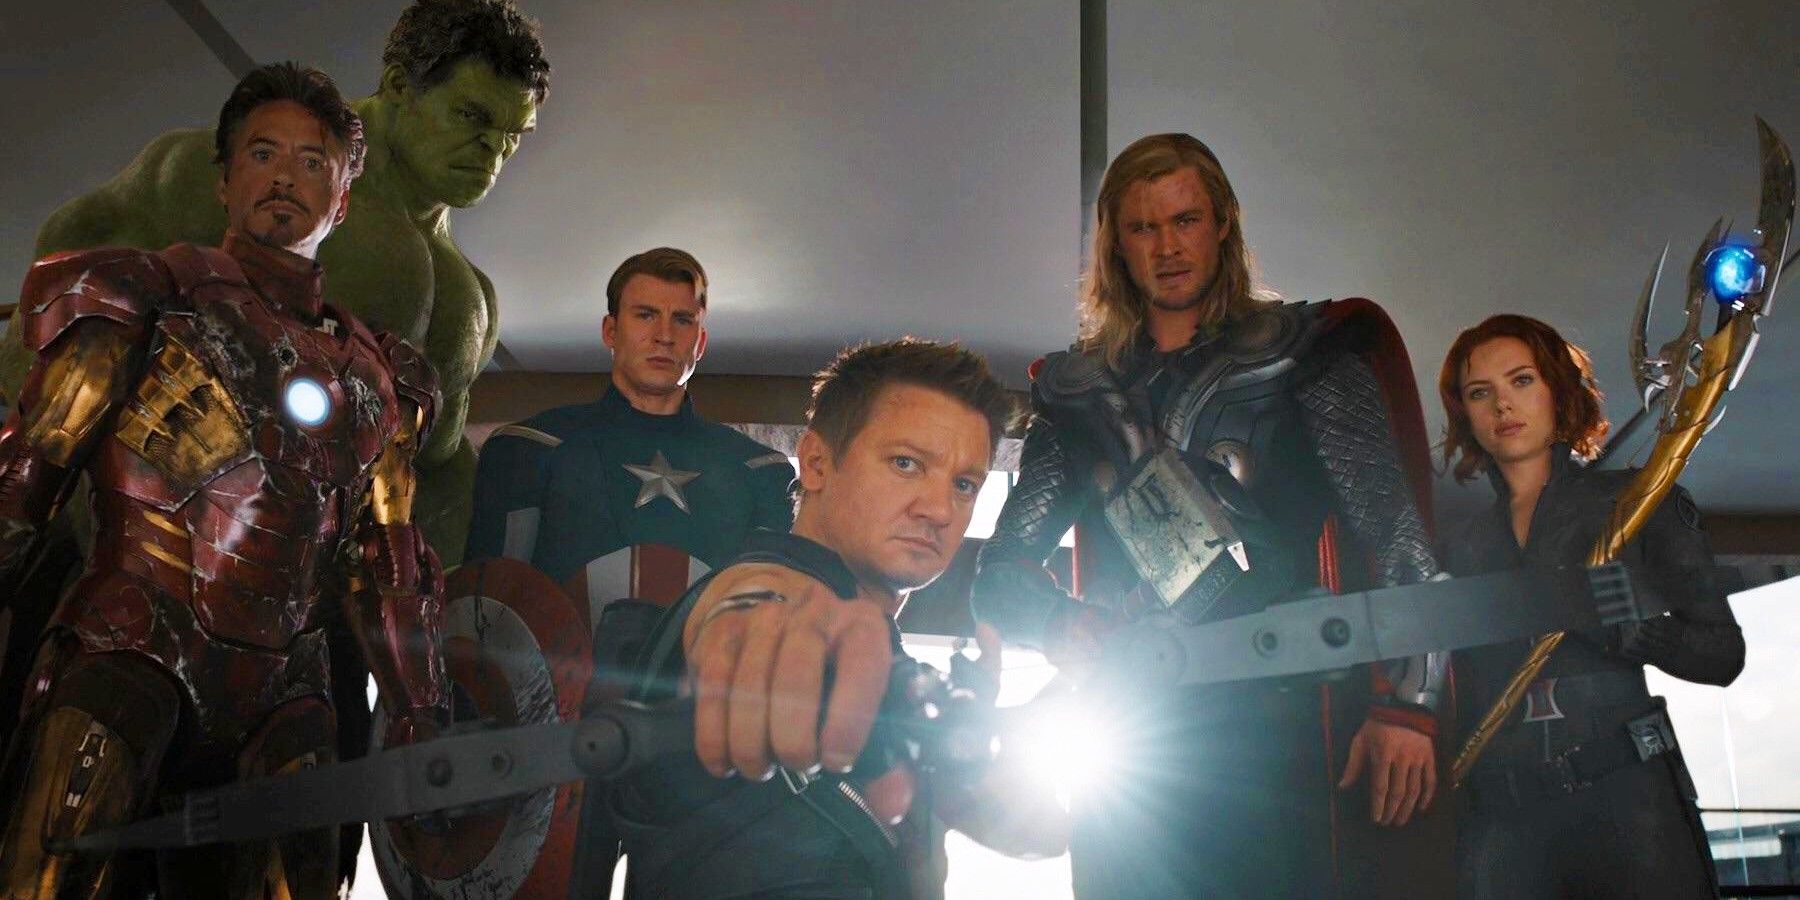 Team shot of the Avengers looking at the camera from after Hulk beats up Loki in 2012'x The Avengers.